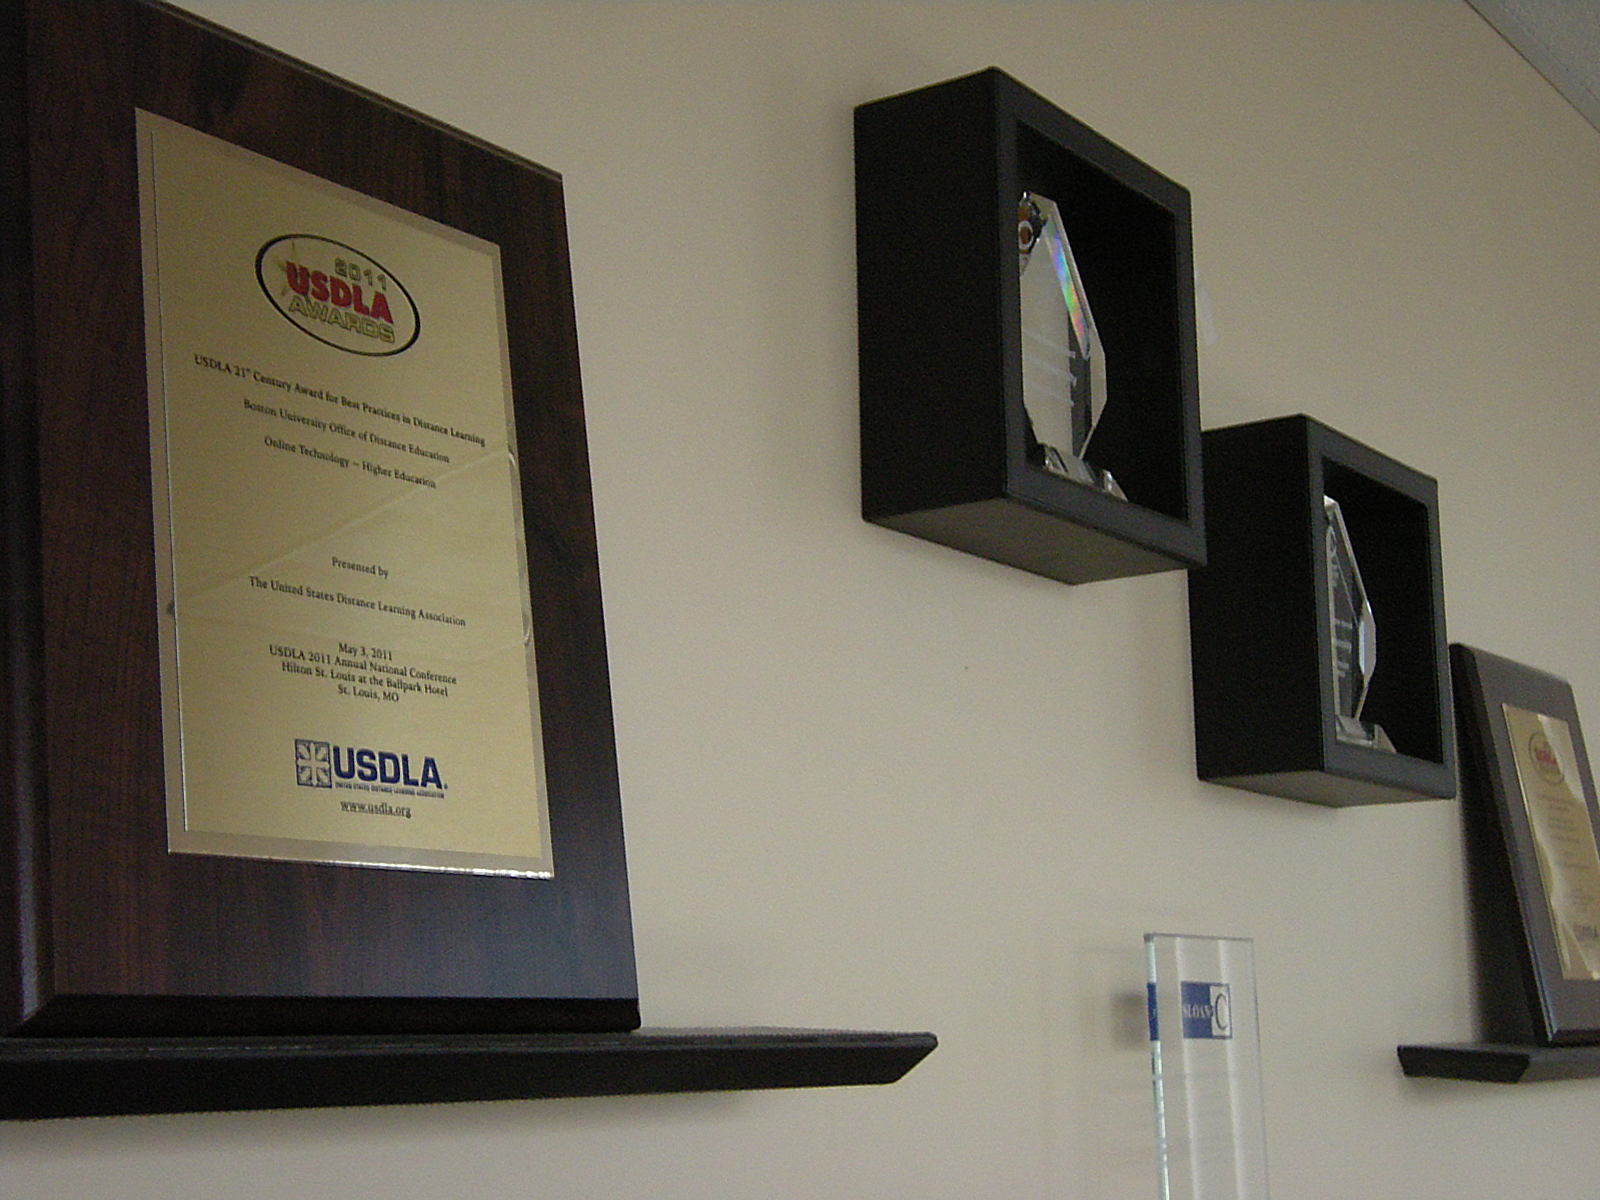 At left, the USDLA 21st Century Best Practices Award, the latest addition to our wall of honors.